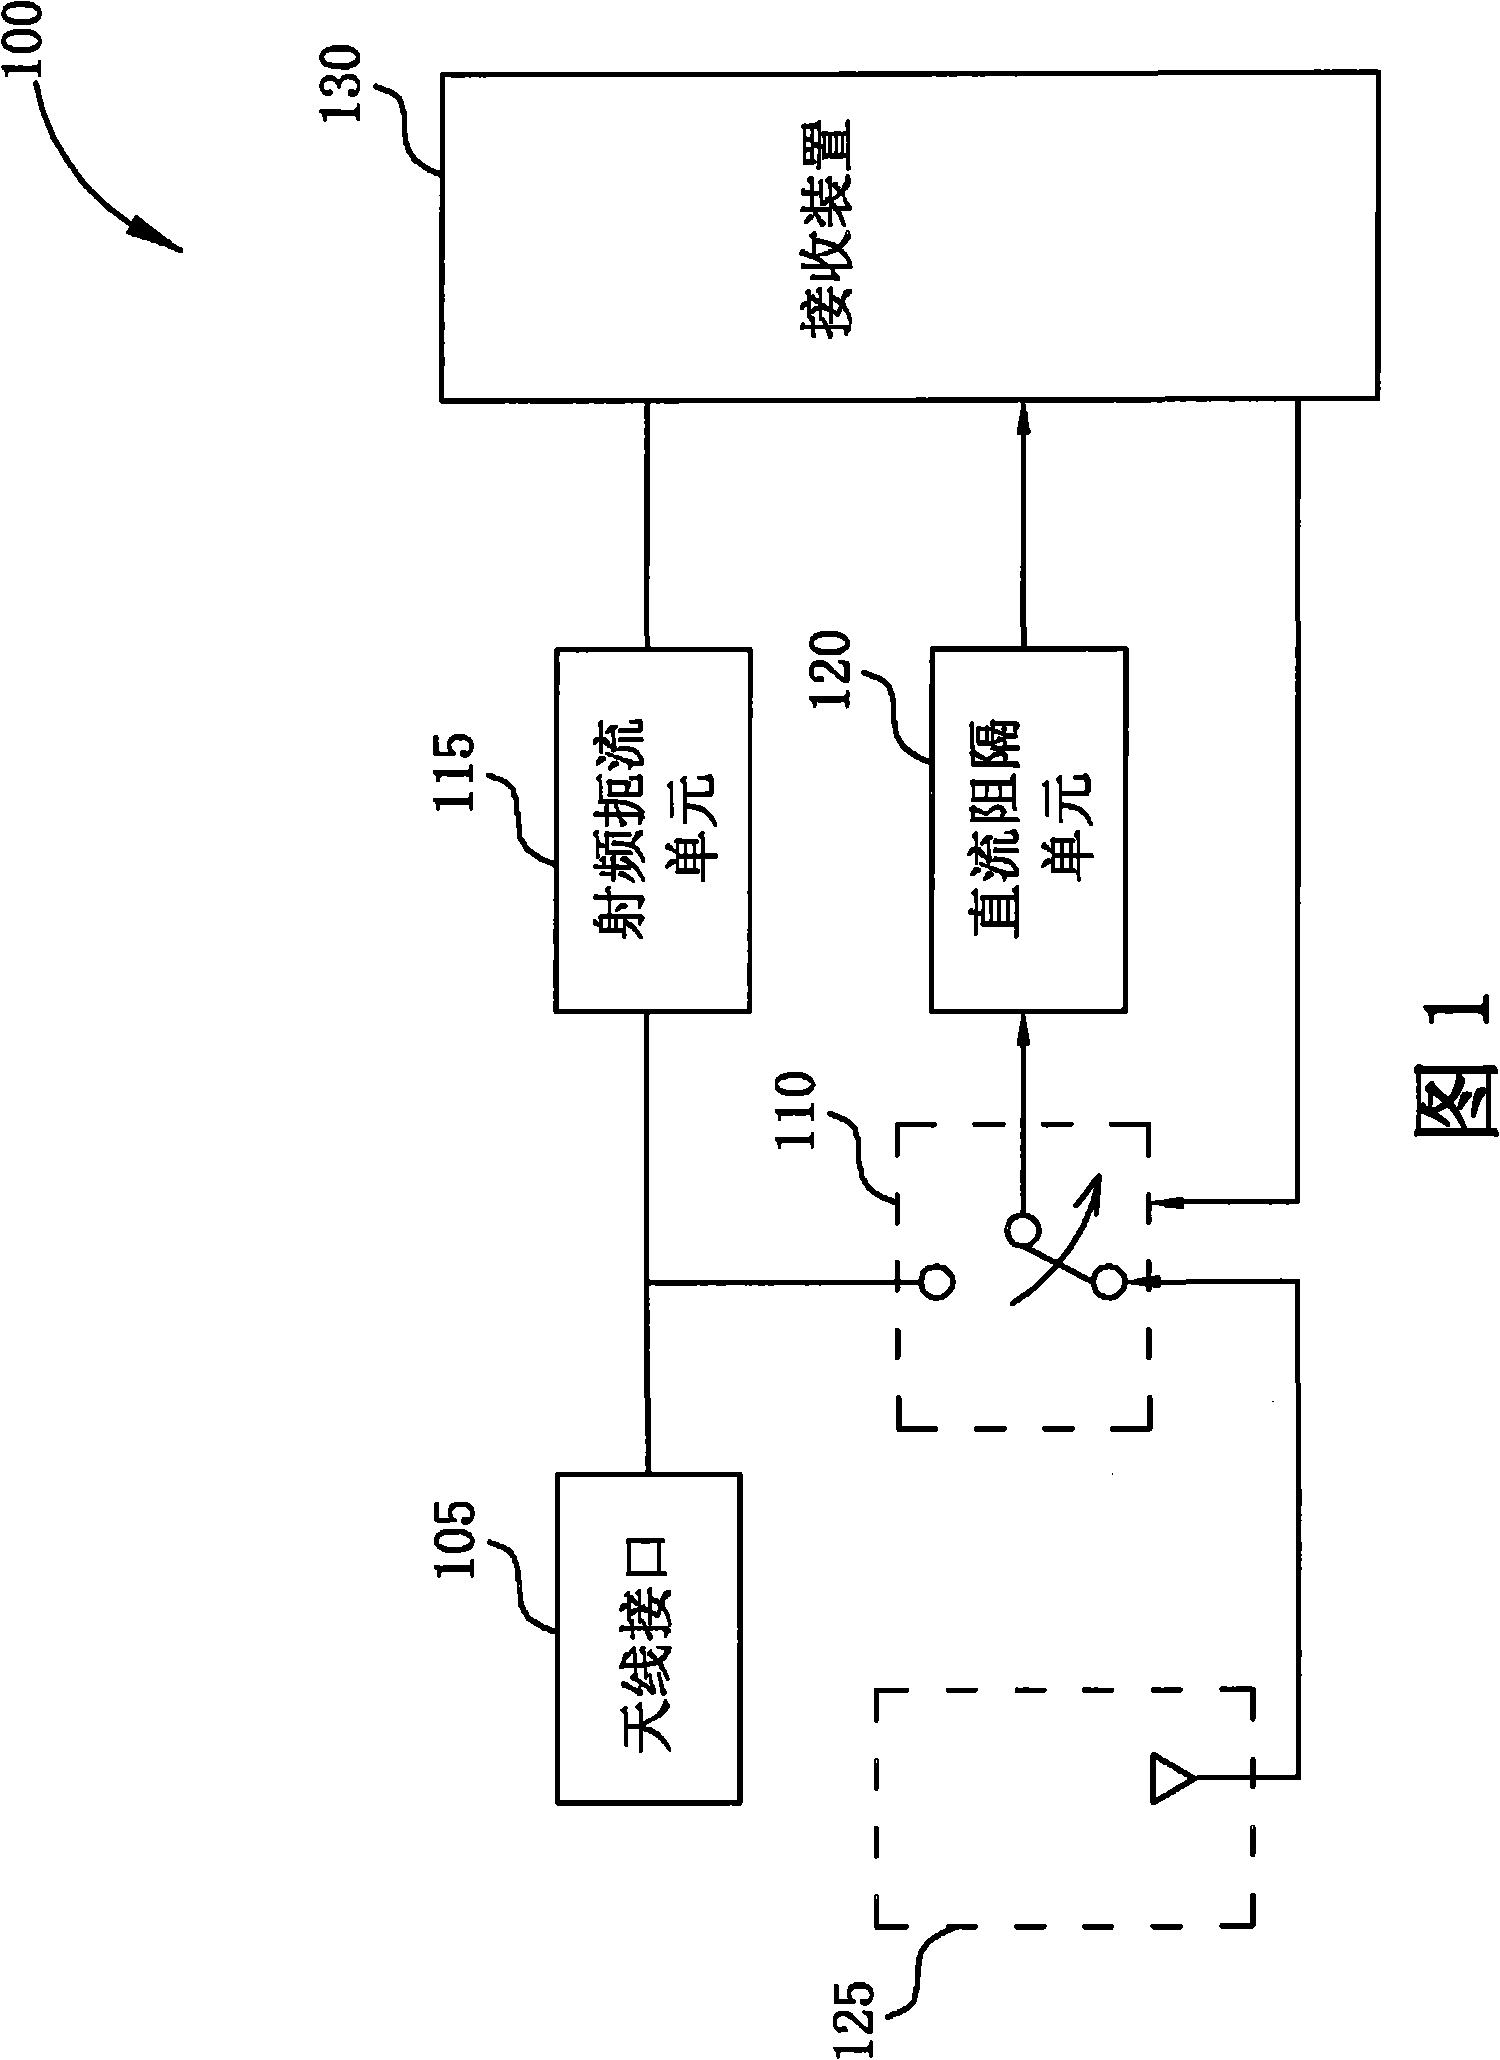 Antenna switching system and related method